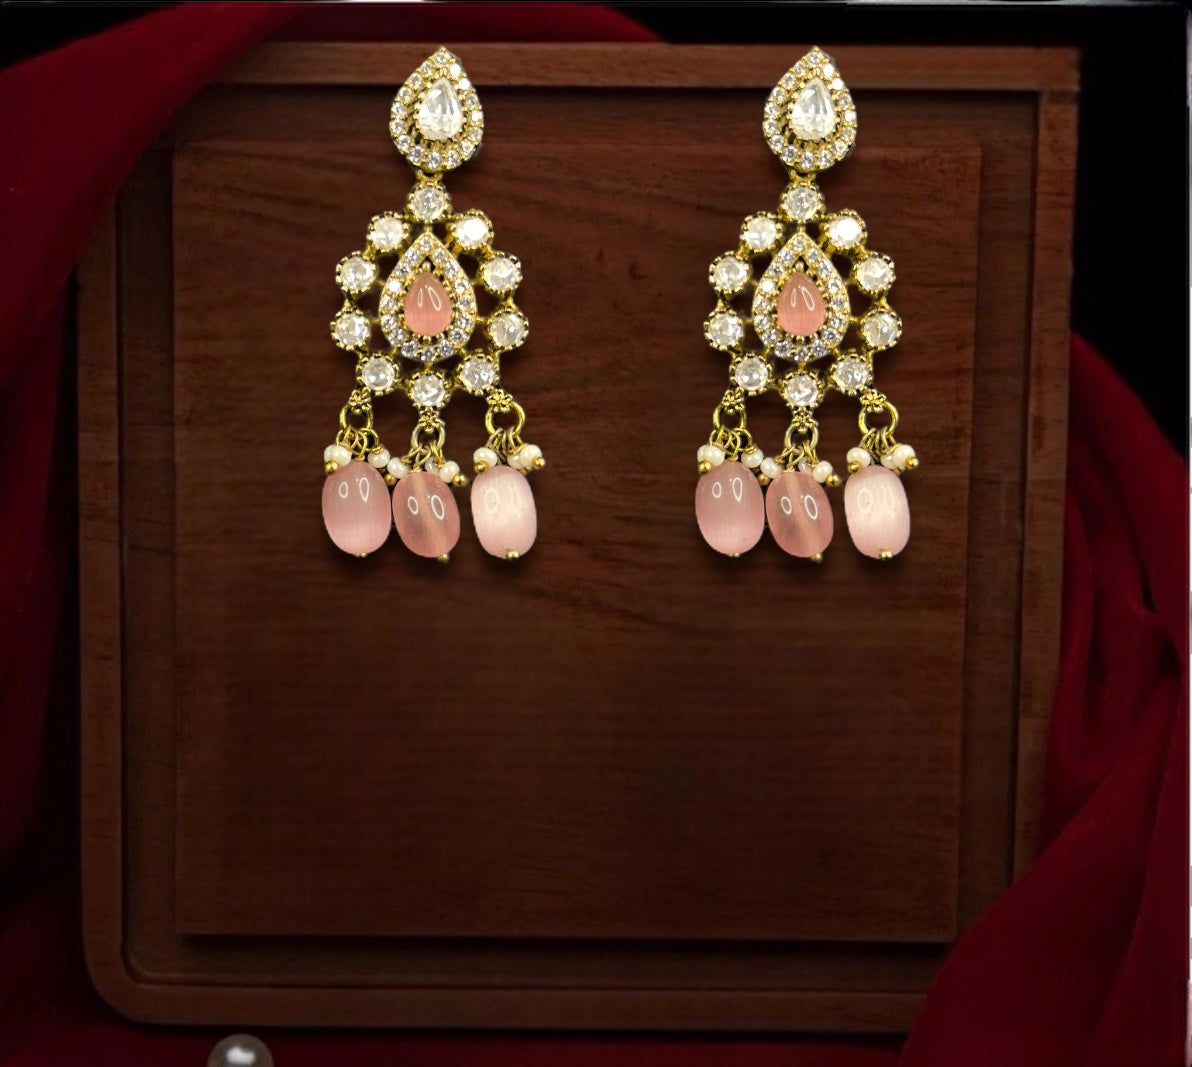 Antique Victorian Diamond Polki Earrings wtih zirconia, moissanite polki stones, pearls, and beads. This Victorian Jewellery is available in Pink, Red, Purple & Mint colour variants. 